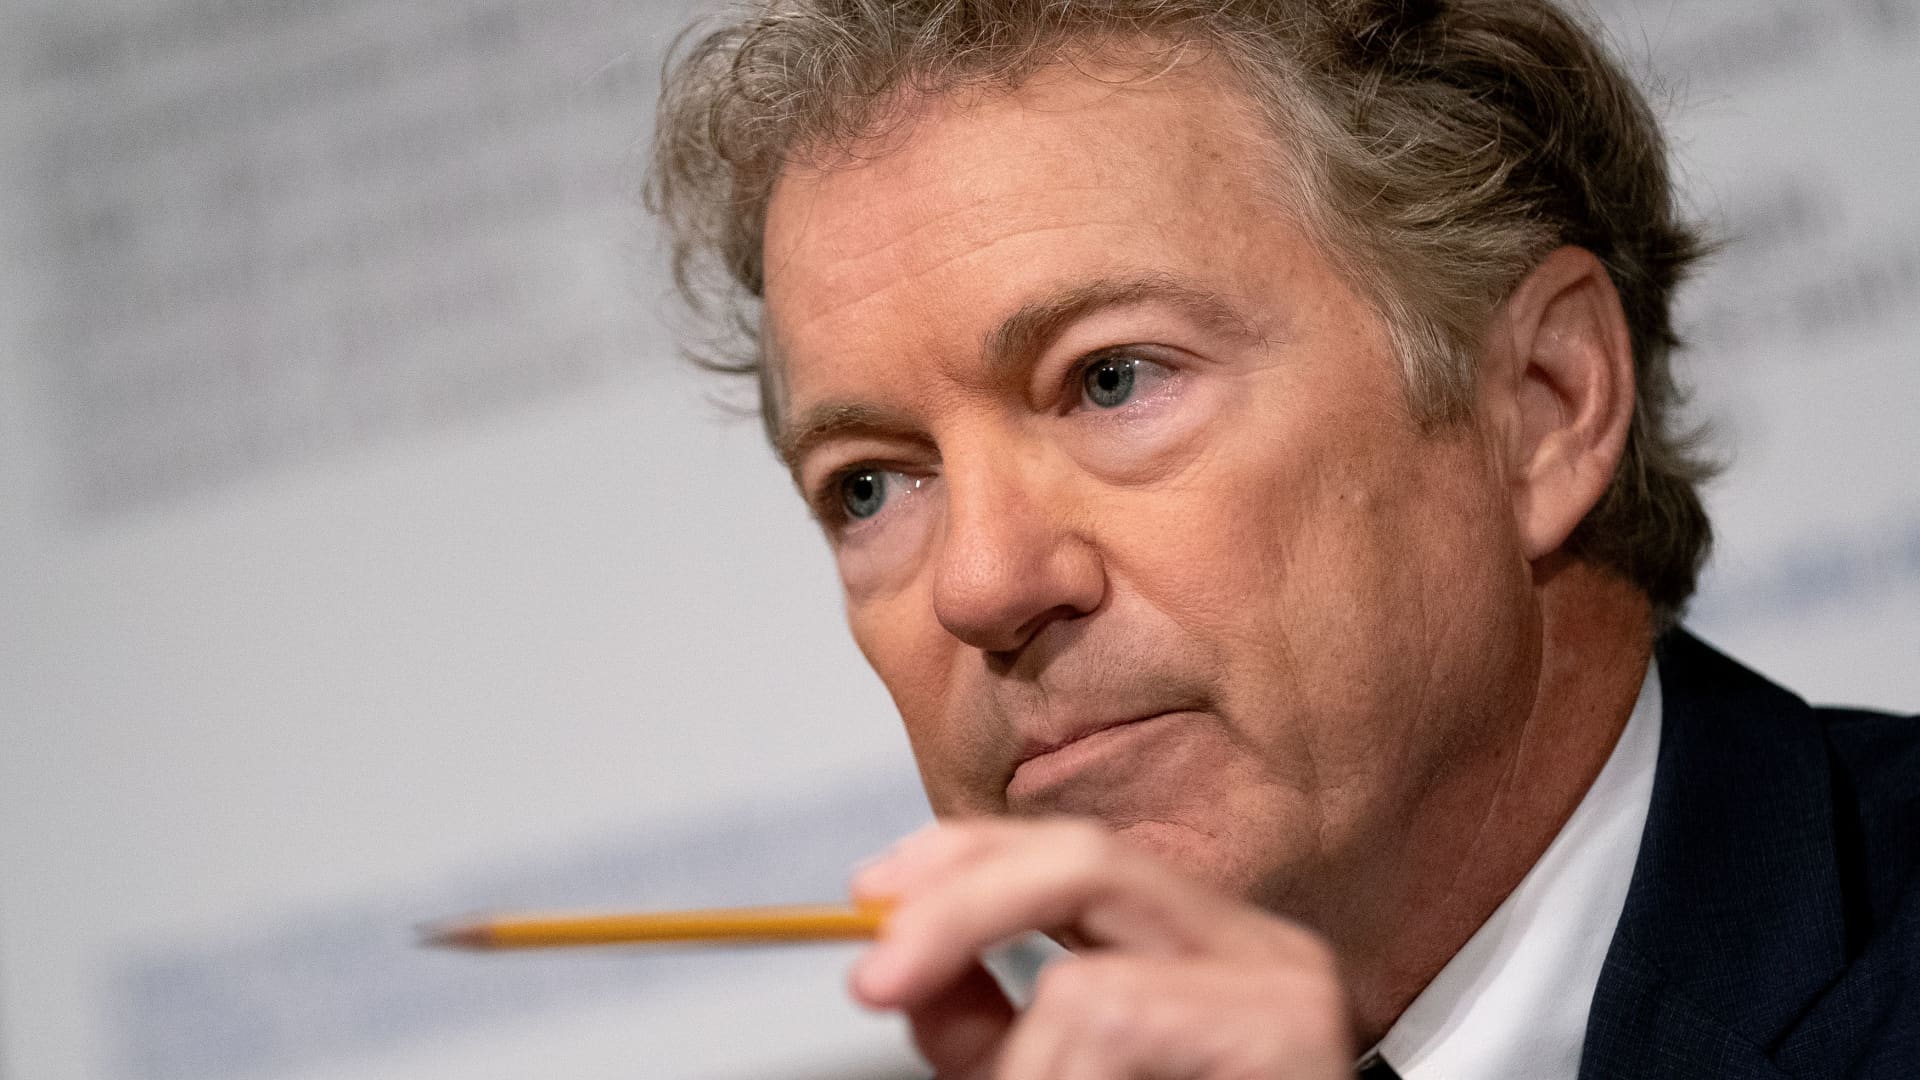 Senator Rand Paul (R-KY) speaks during a Senate Health, Education, Labor, and Pensions Committee hearing at the Dirksen Senate Office Building in Washington, D.C., U.S., July 20, 2021.